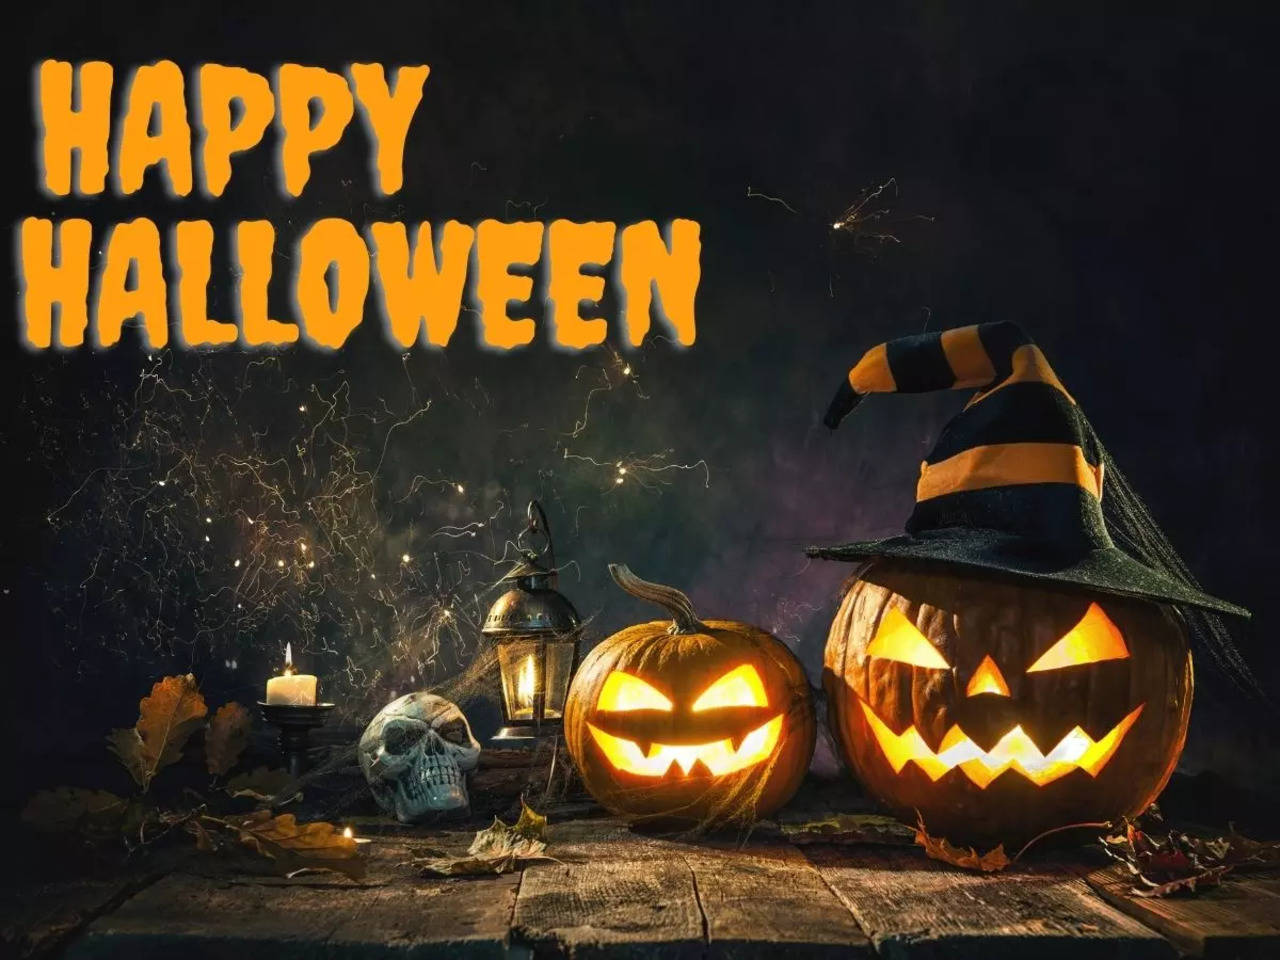 Happy Halloween 2022: Wishes, Messages, Quotes, Greeting cards, Image, Picture and GIFs of India